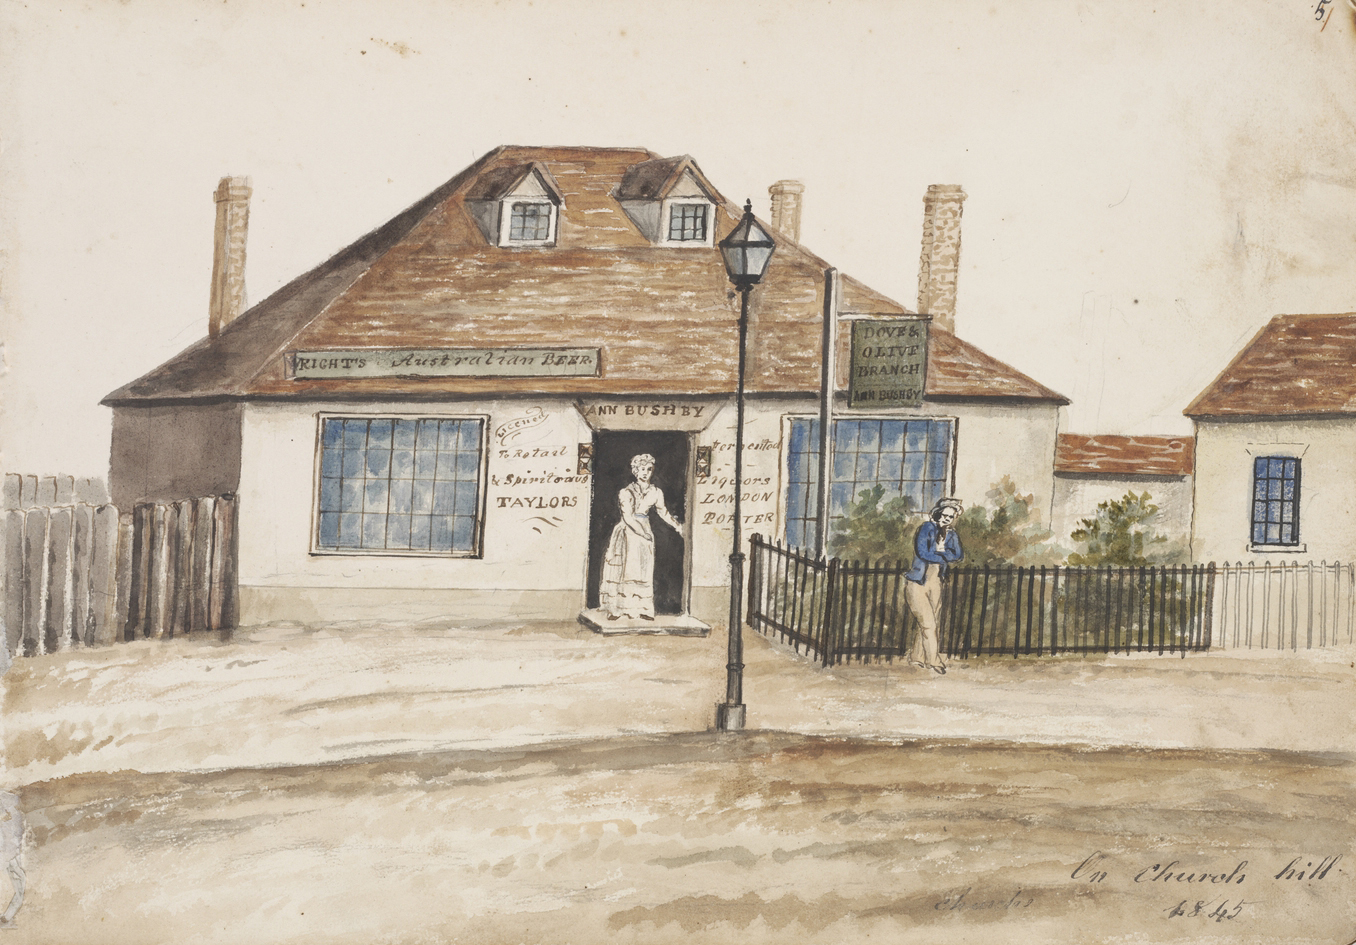 Ann Bushby’s Dove and Olive Branch public house in Sydney, 1845. Mrs Bushby did not brew her own; as her advertising shows, she had on sale Taylor’s London Porter, and local beer from Wright’s Australian Brewery in George Street.